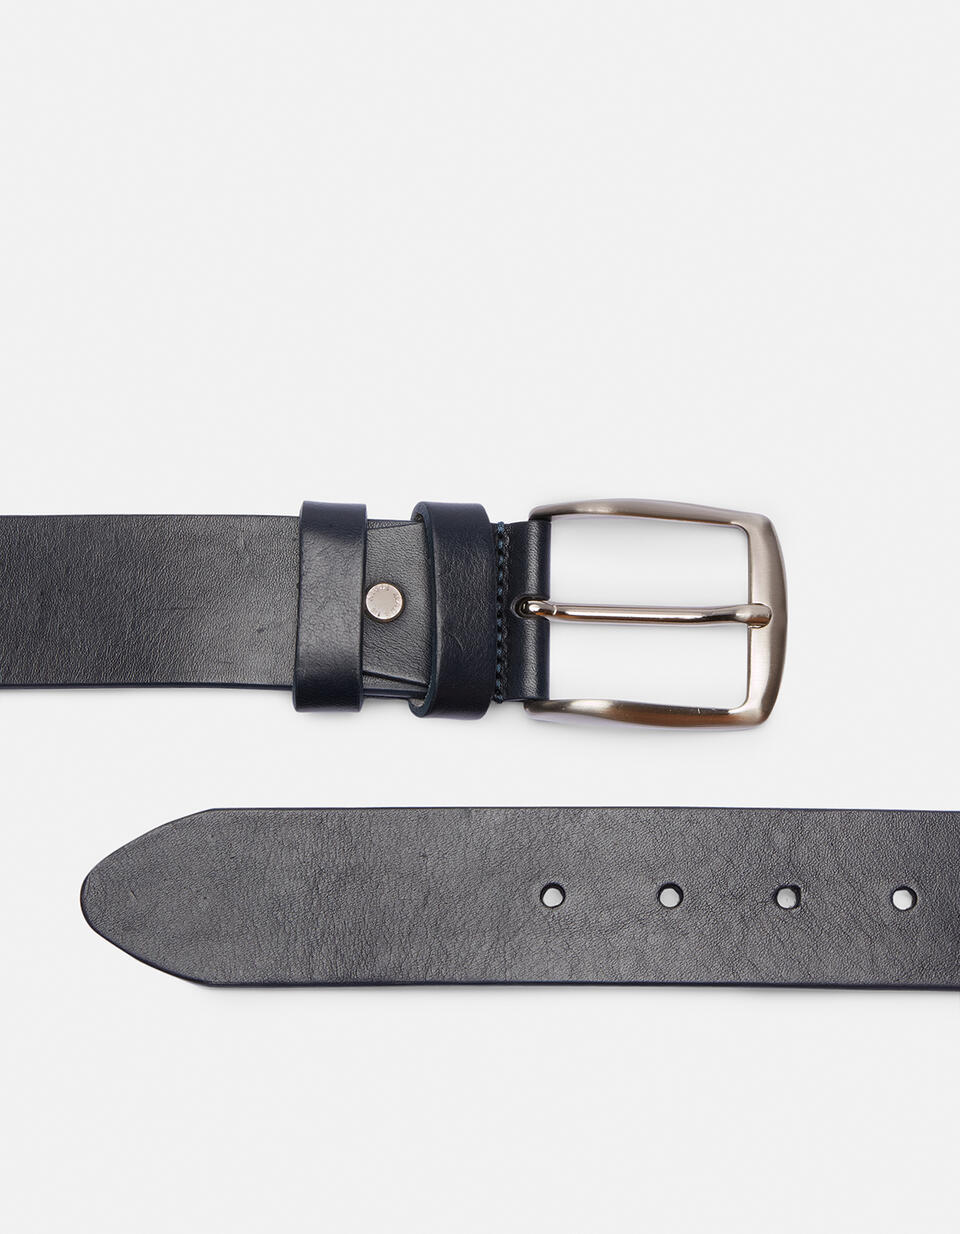 CLASSIC LEATHER BELT WITHOUT SEAMS HEIGHT 4,0 CM - Men Belts | Belts BLU - Men Belts | BeltsCuoieria Fiorentina